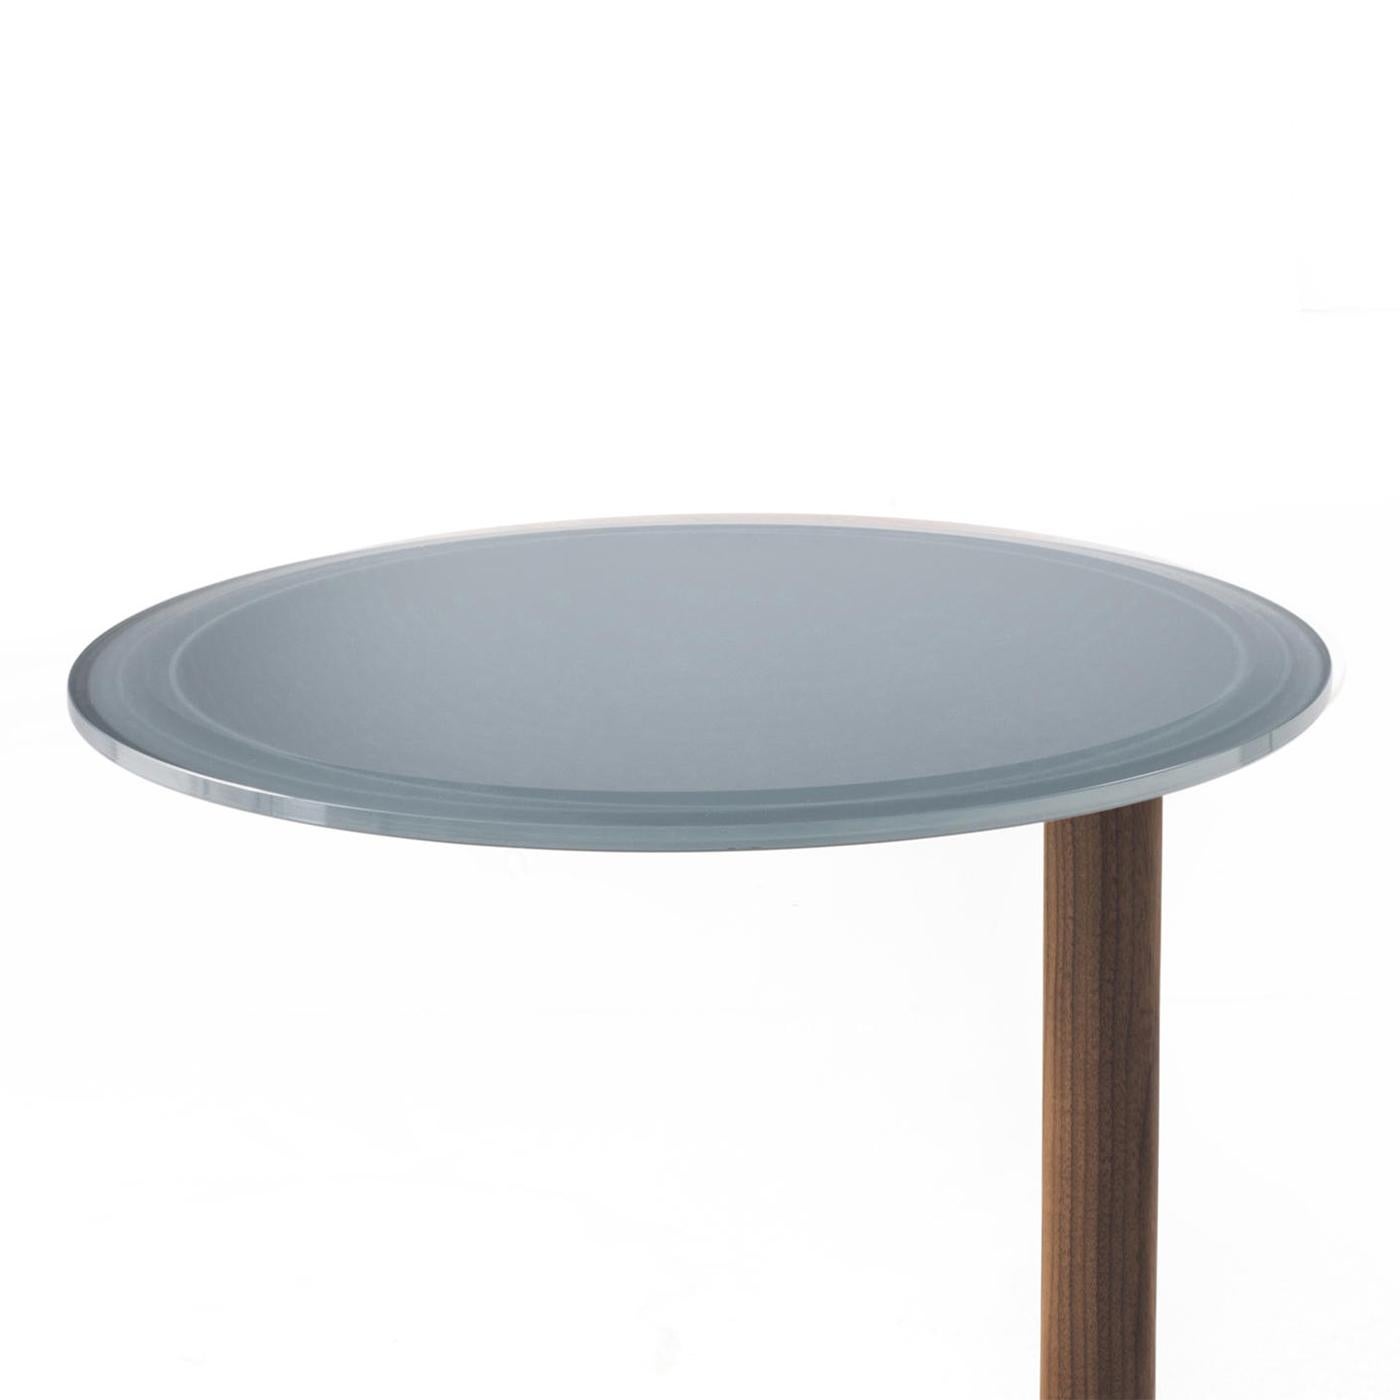 Side table Jaha glass with solid brass base
in brushed finish, with solid walnut wood pole
and with bevelled tempered round glass top.